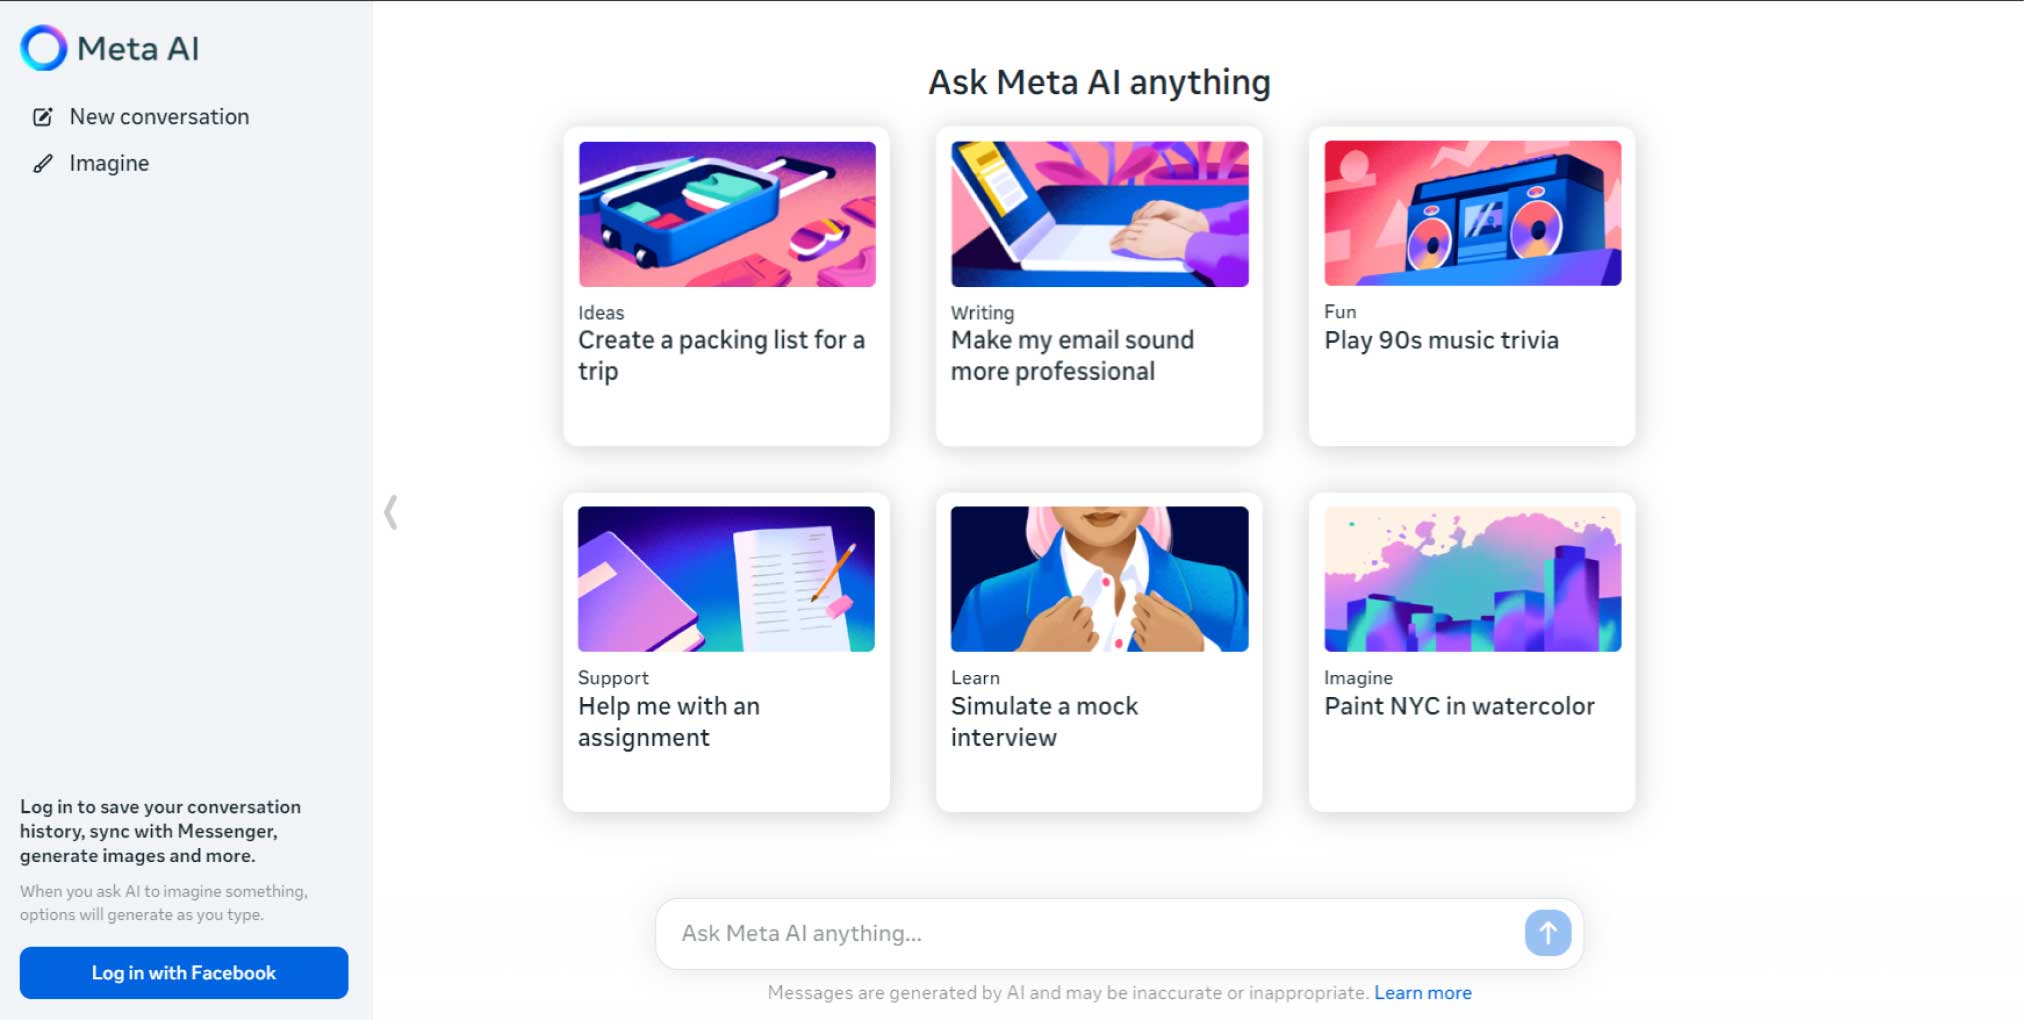 How to Access Meta AI on Facebook, and Instagram